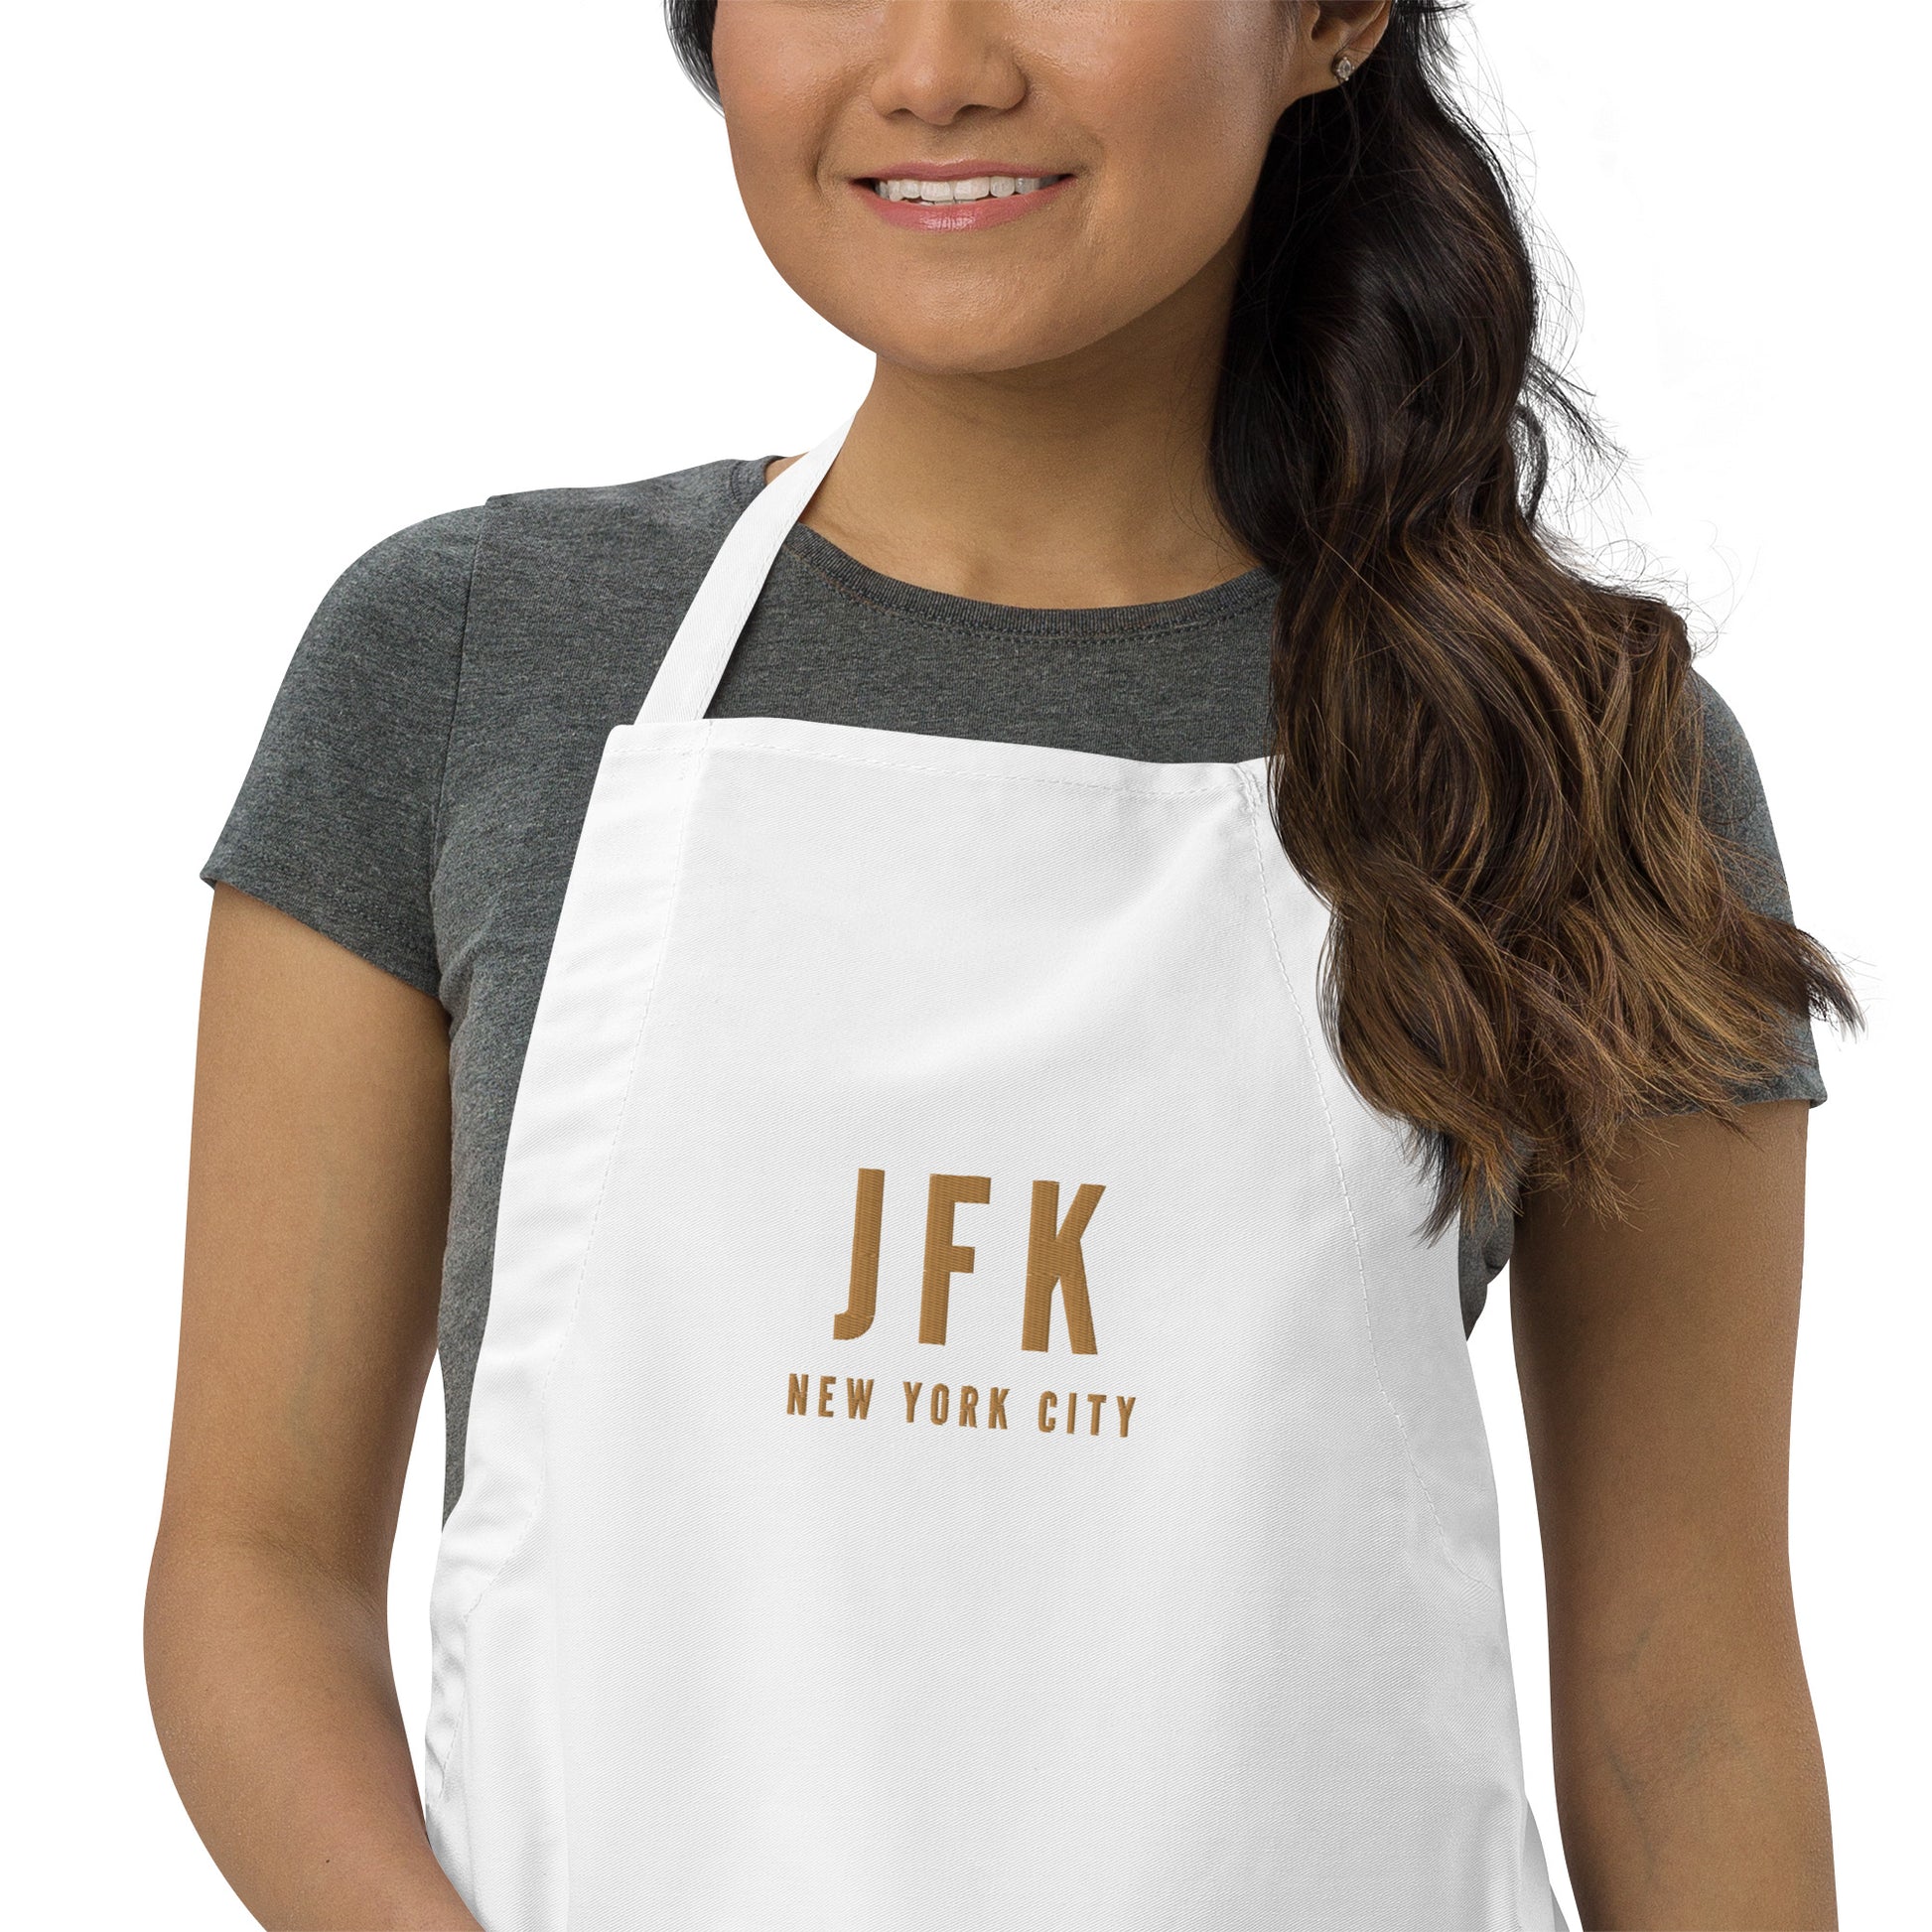 City Embroidered Apron - Old Gold • JFK New York City • YHM Designs - Image 08